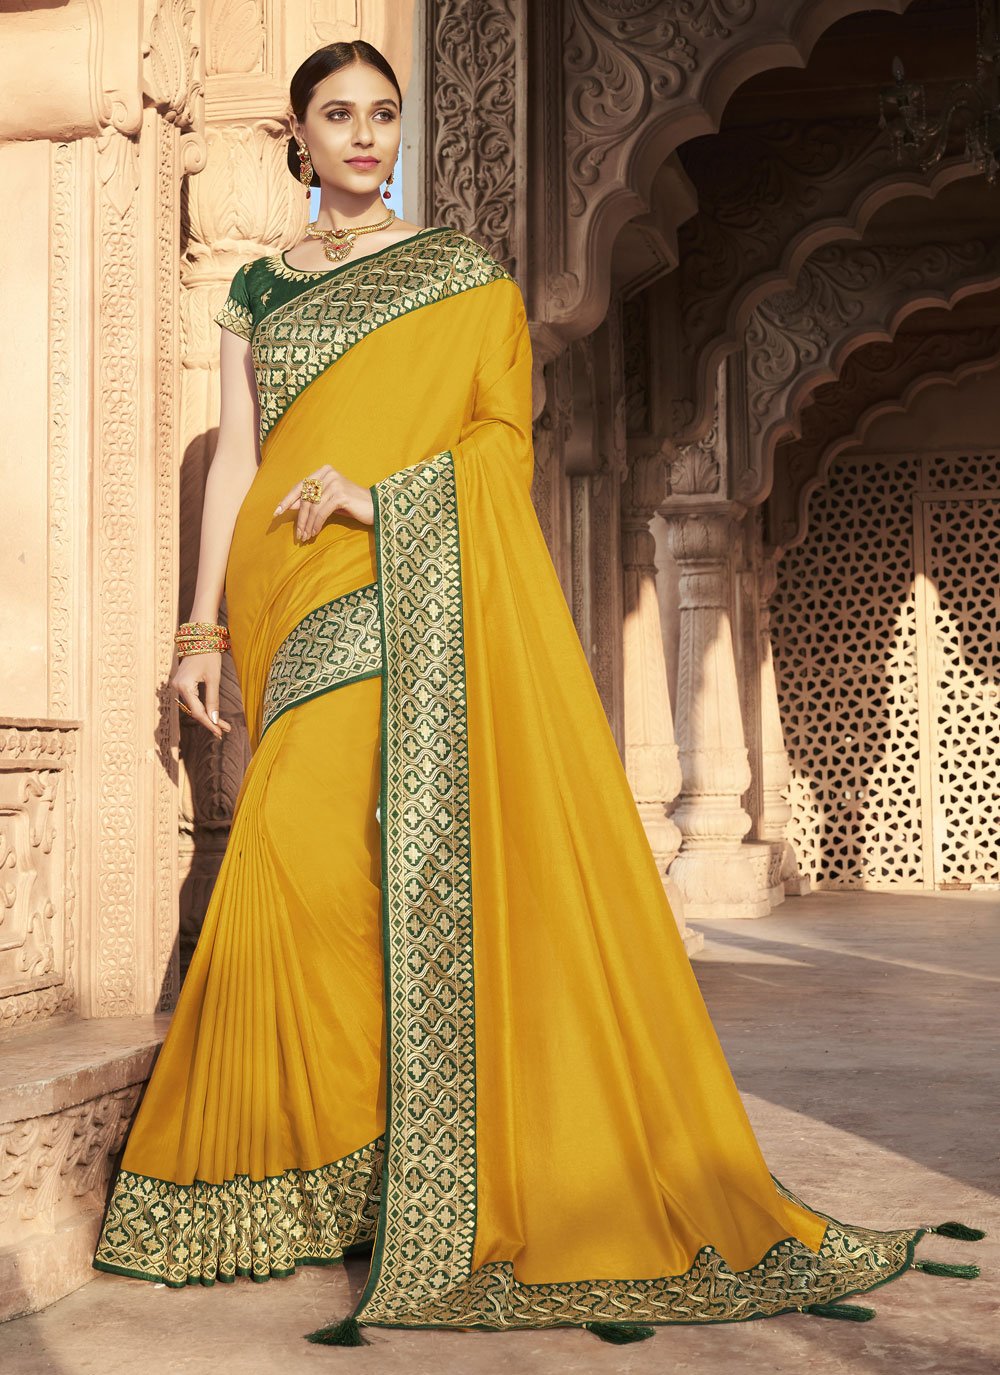 Buy Saree For Women Latest Ethnic Saree(Shree Collection Women's Ethnic Yellow  Saree,Yellow Fancy Saree,Best Fancy Saree) at Amazon.in